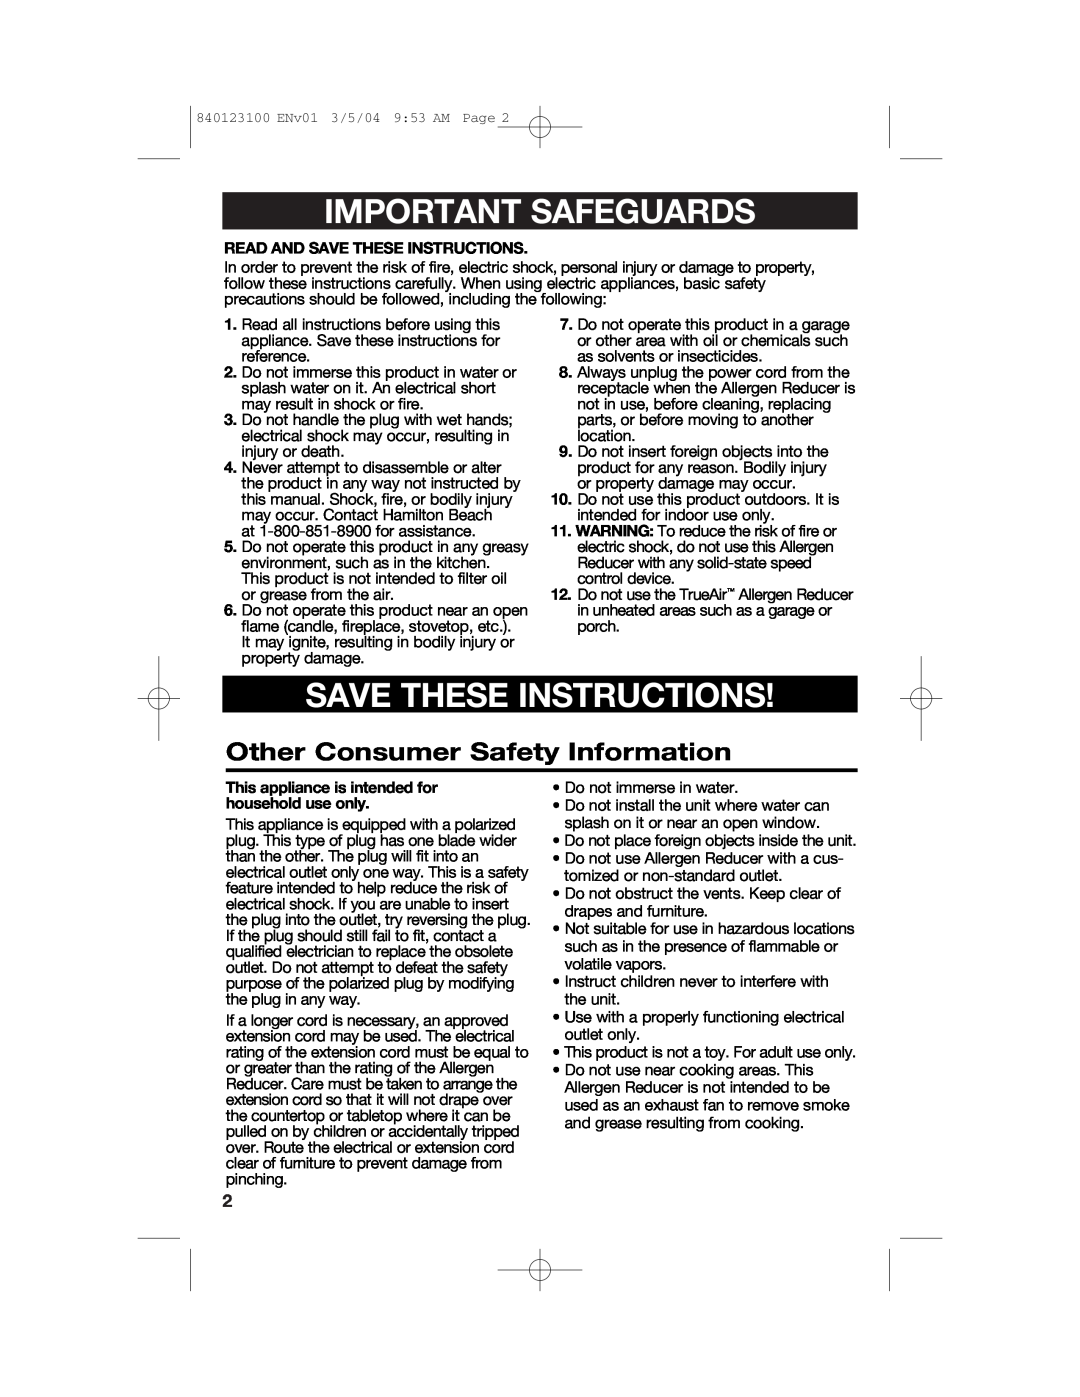 Hamilton Beach 840123100 manual Important Safeguards, Save These Instructions, Other Consumer Safety Information 